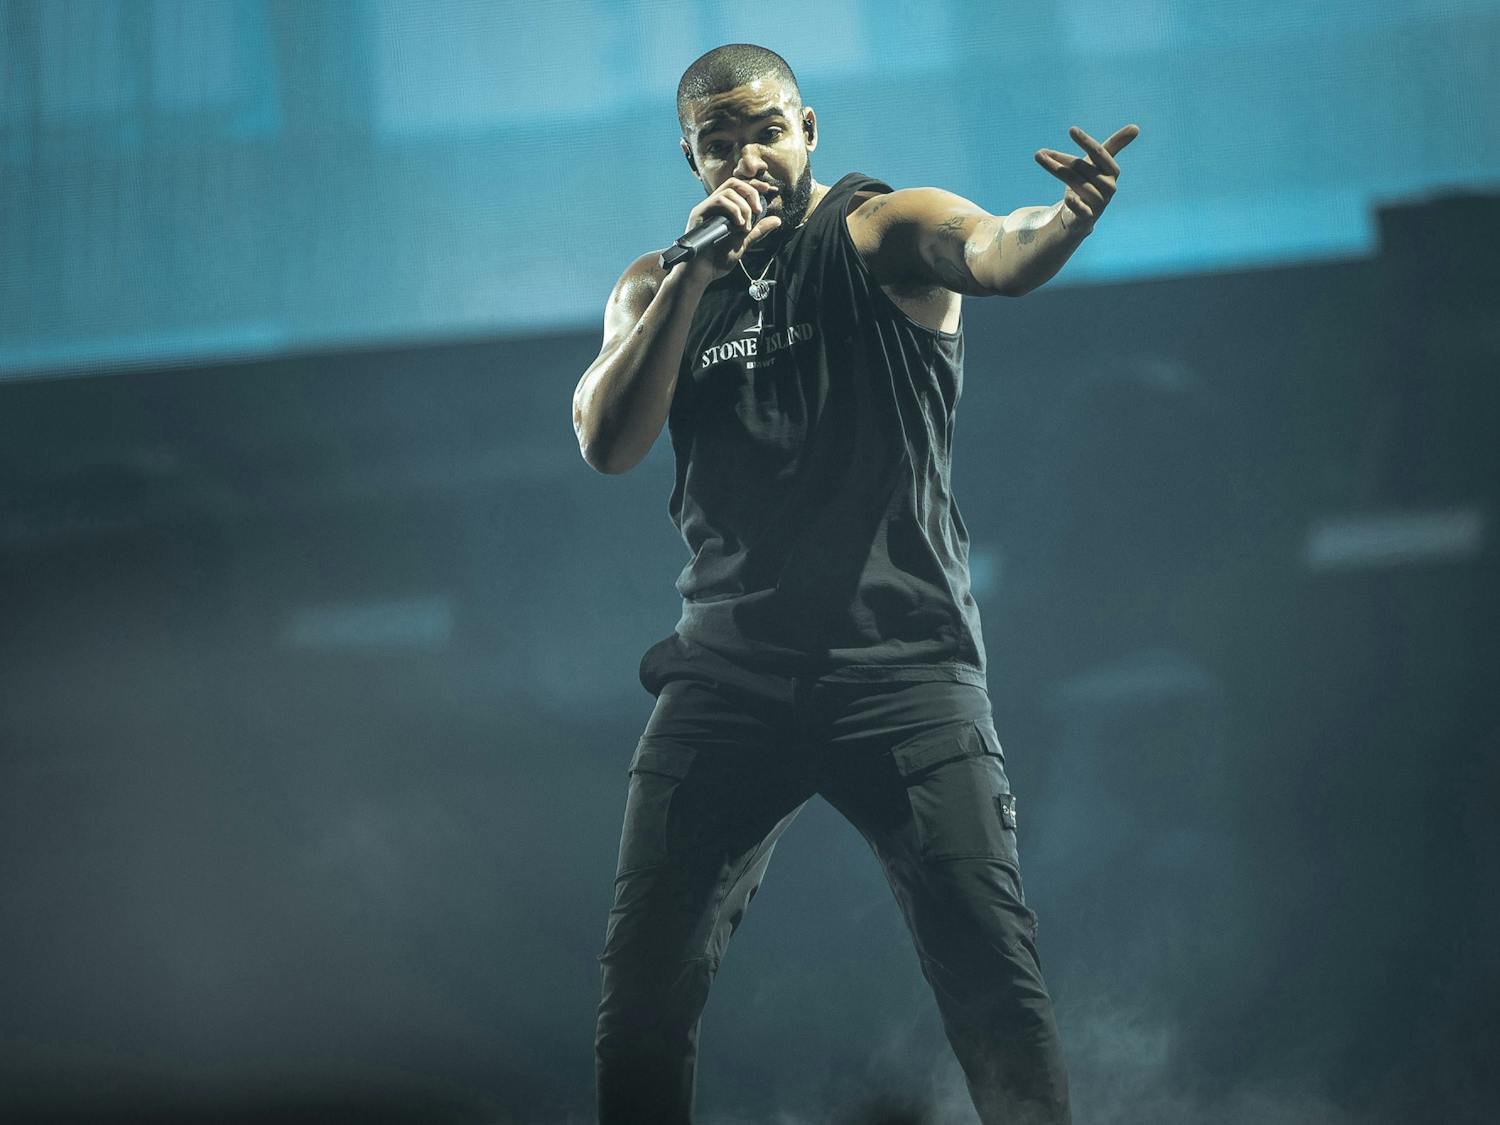 Drake performs on stage as a new cameo on Bad Bunny's smash hit "MIA" the rapper notched his 12th appearance on a Billboard top 10 single in 2018. That sets a new record over the prior landmark set by the Beatles in their world-conquering year of 1964. (Gonzales/Samy Khabthani/Avalon/Zuma Press/TNS)